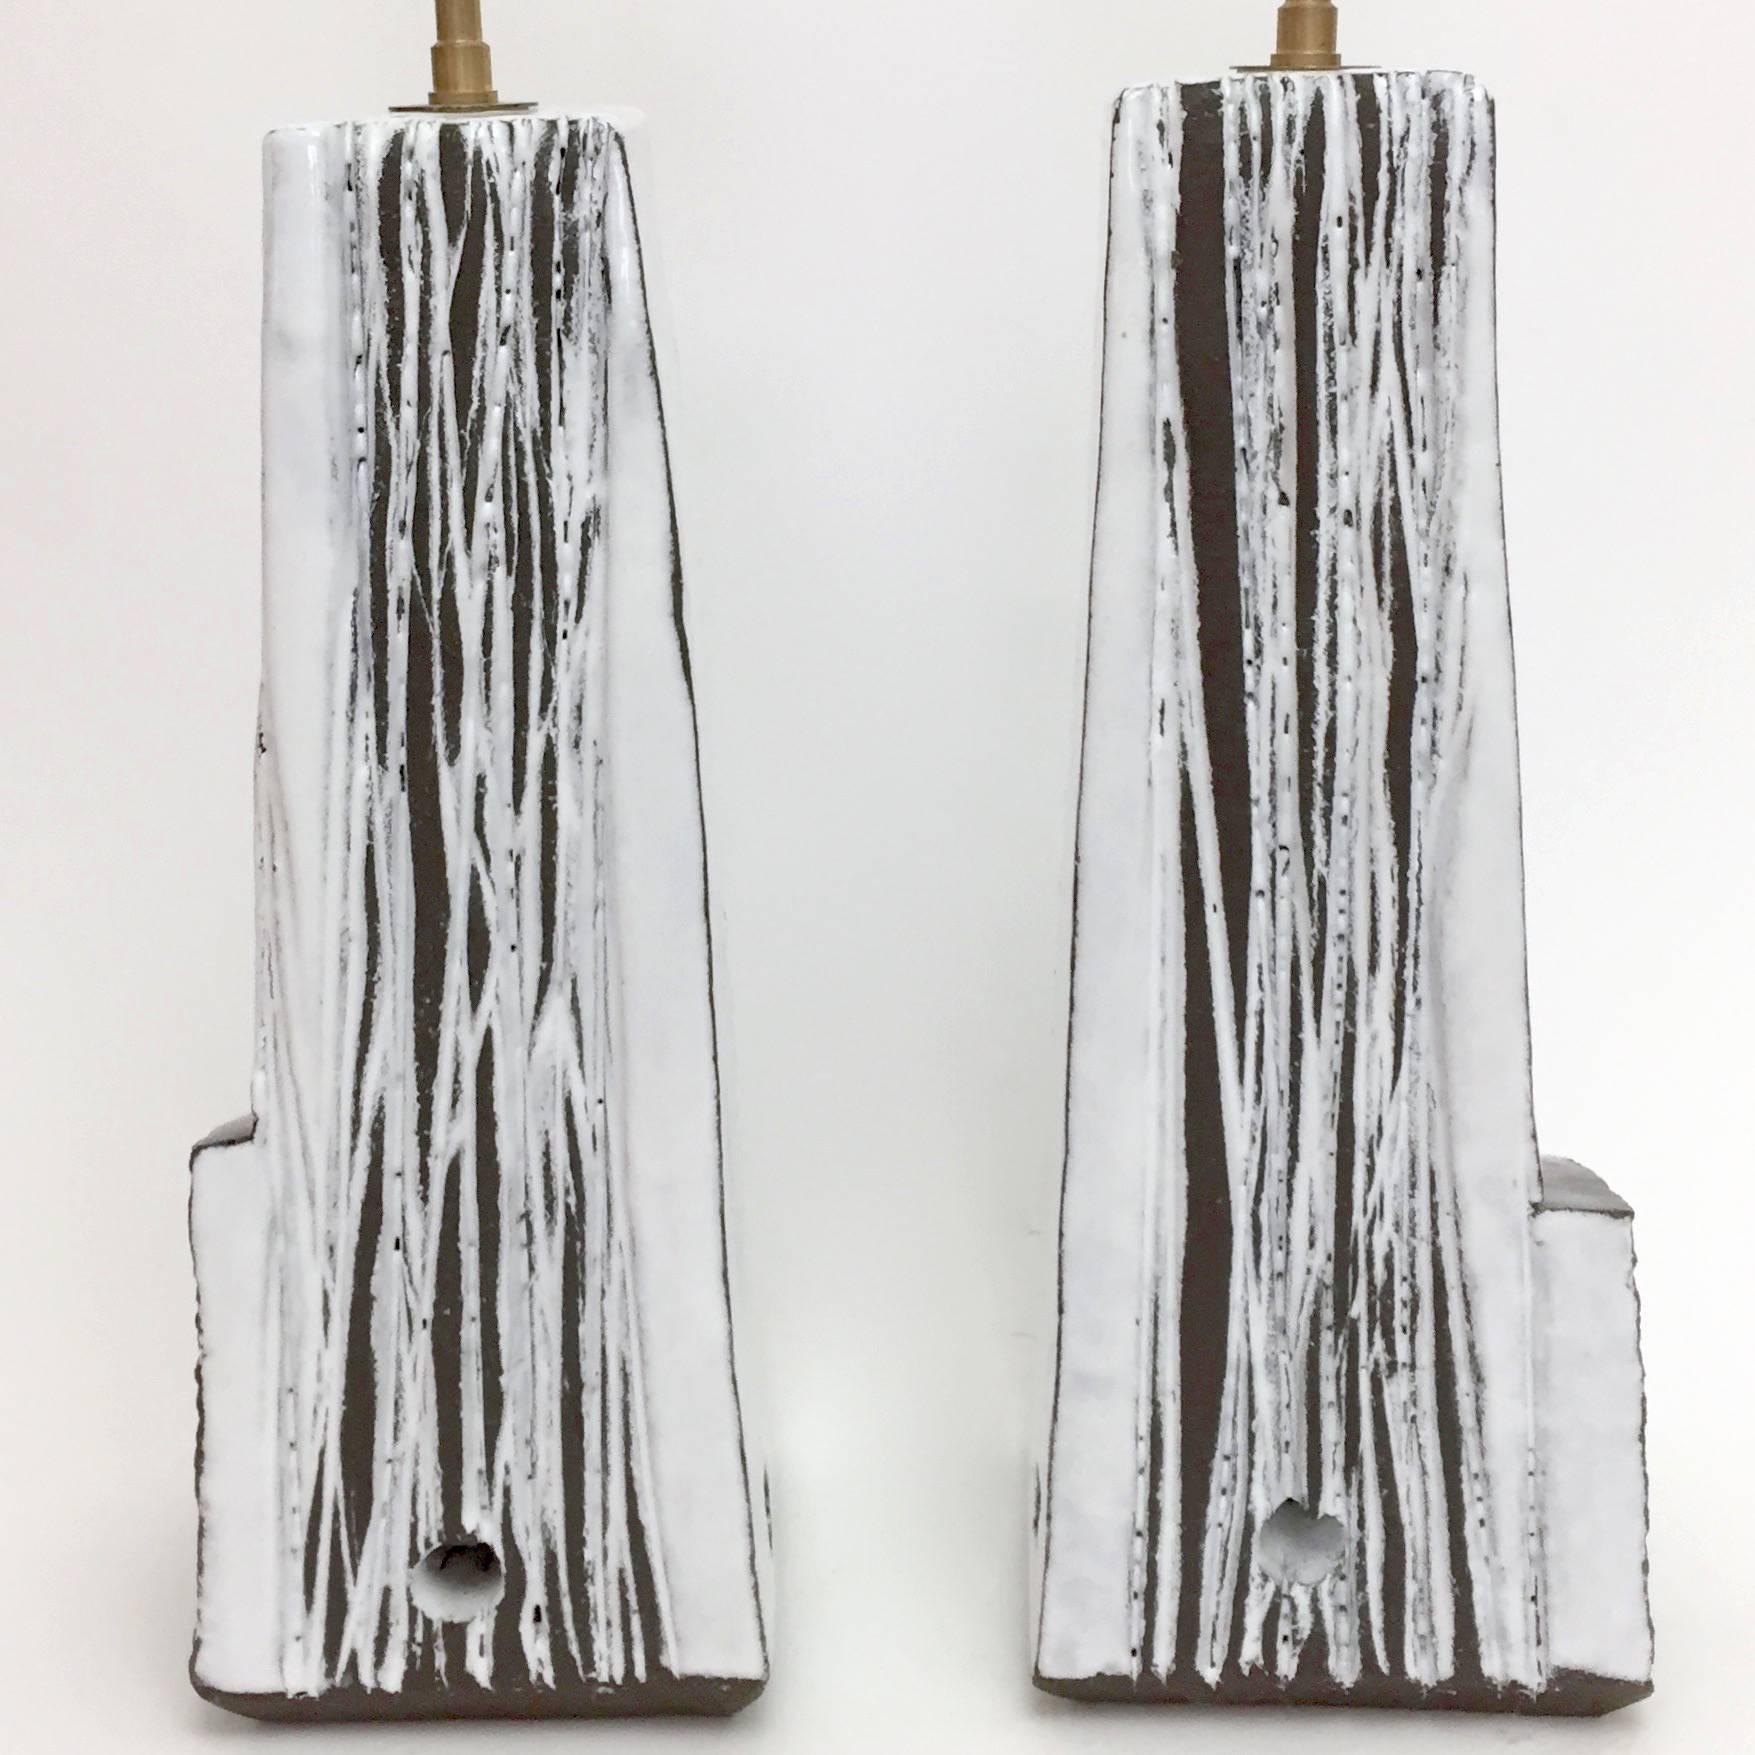 Contemporary Pair of Ceramic Lamp Bases Glazed in Black and White